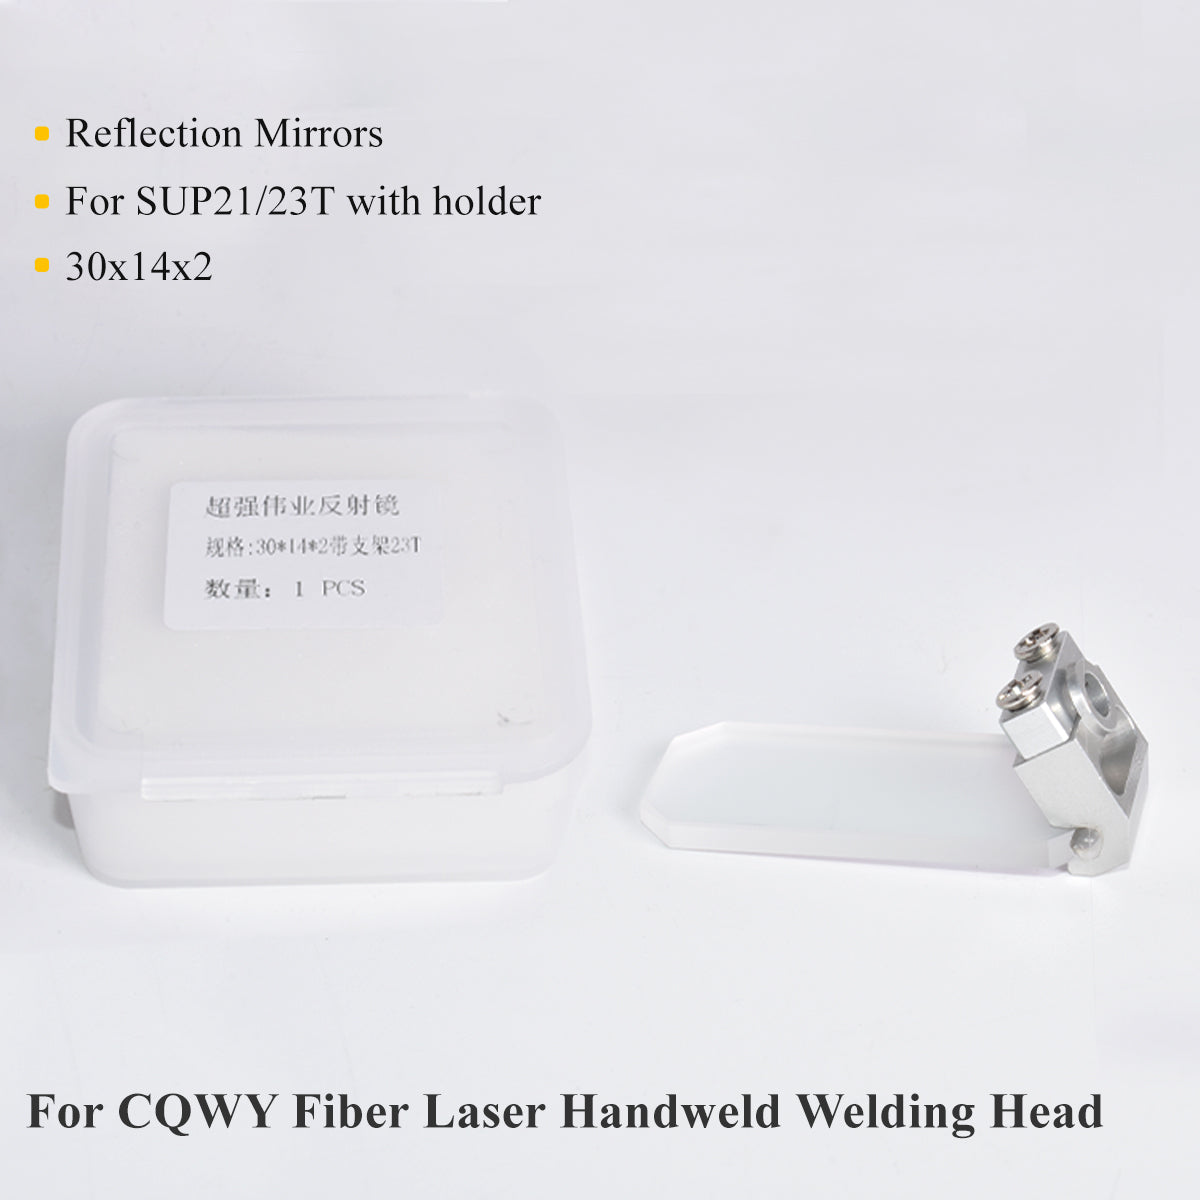 Startnow Laser Reflector Mirrors 30x14x2mm For CQWY SUP20S/T QILIN Welder Cutting Head Collimation Reflective Lens With Holder